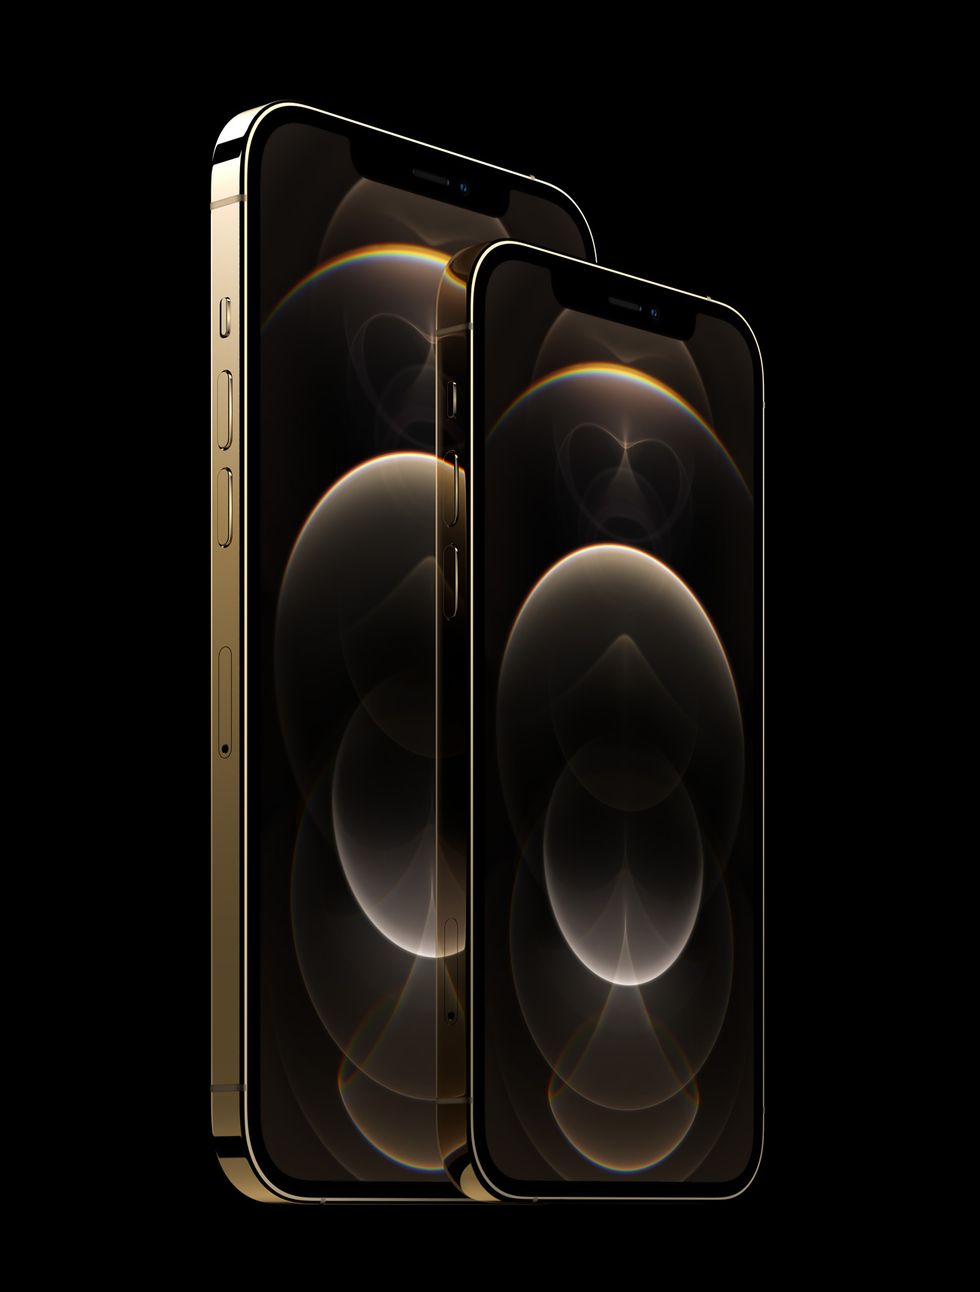 iphone 12 pro and iphone 12 pro max in gold